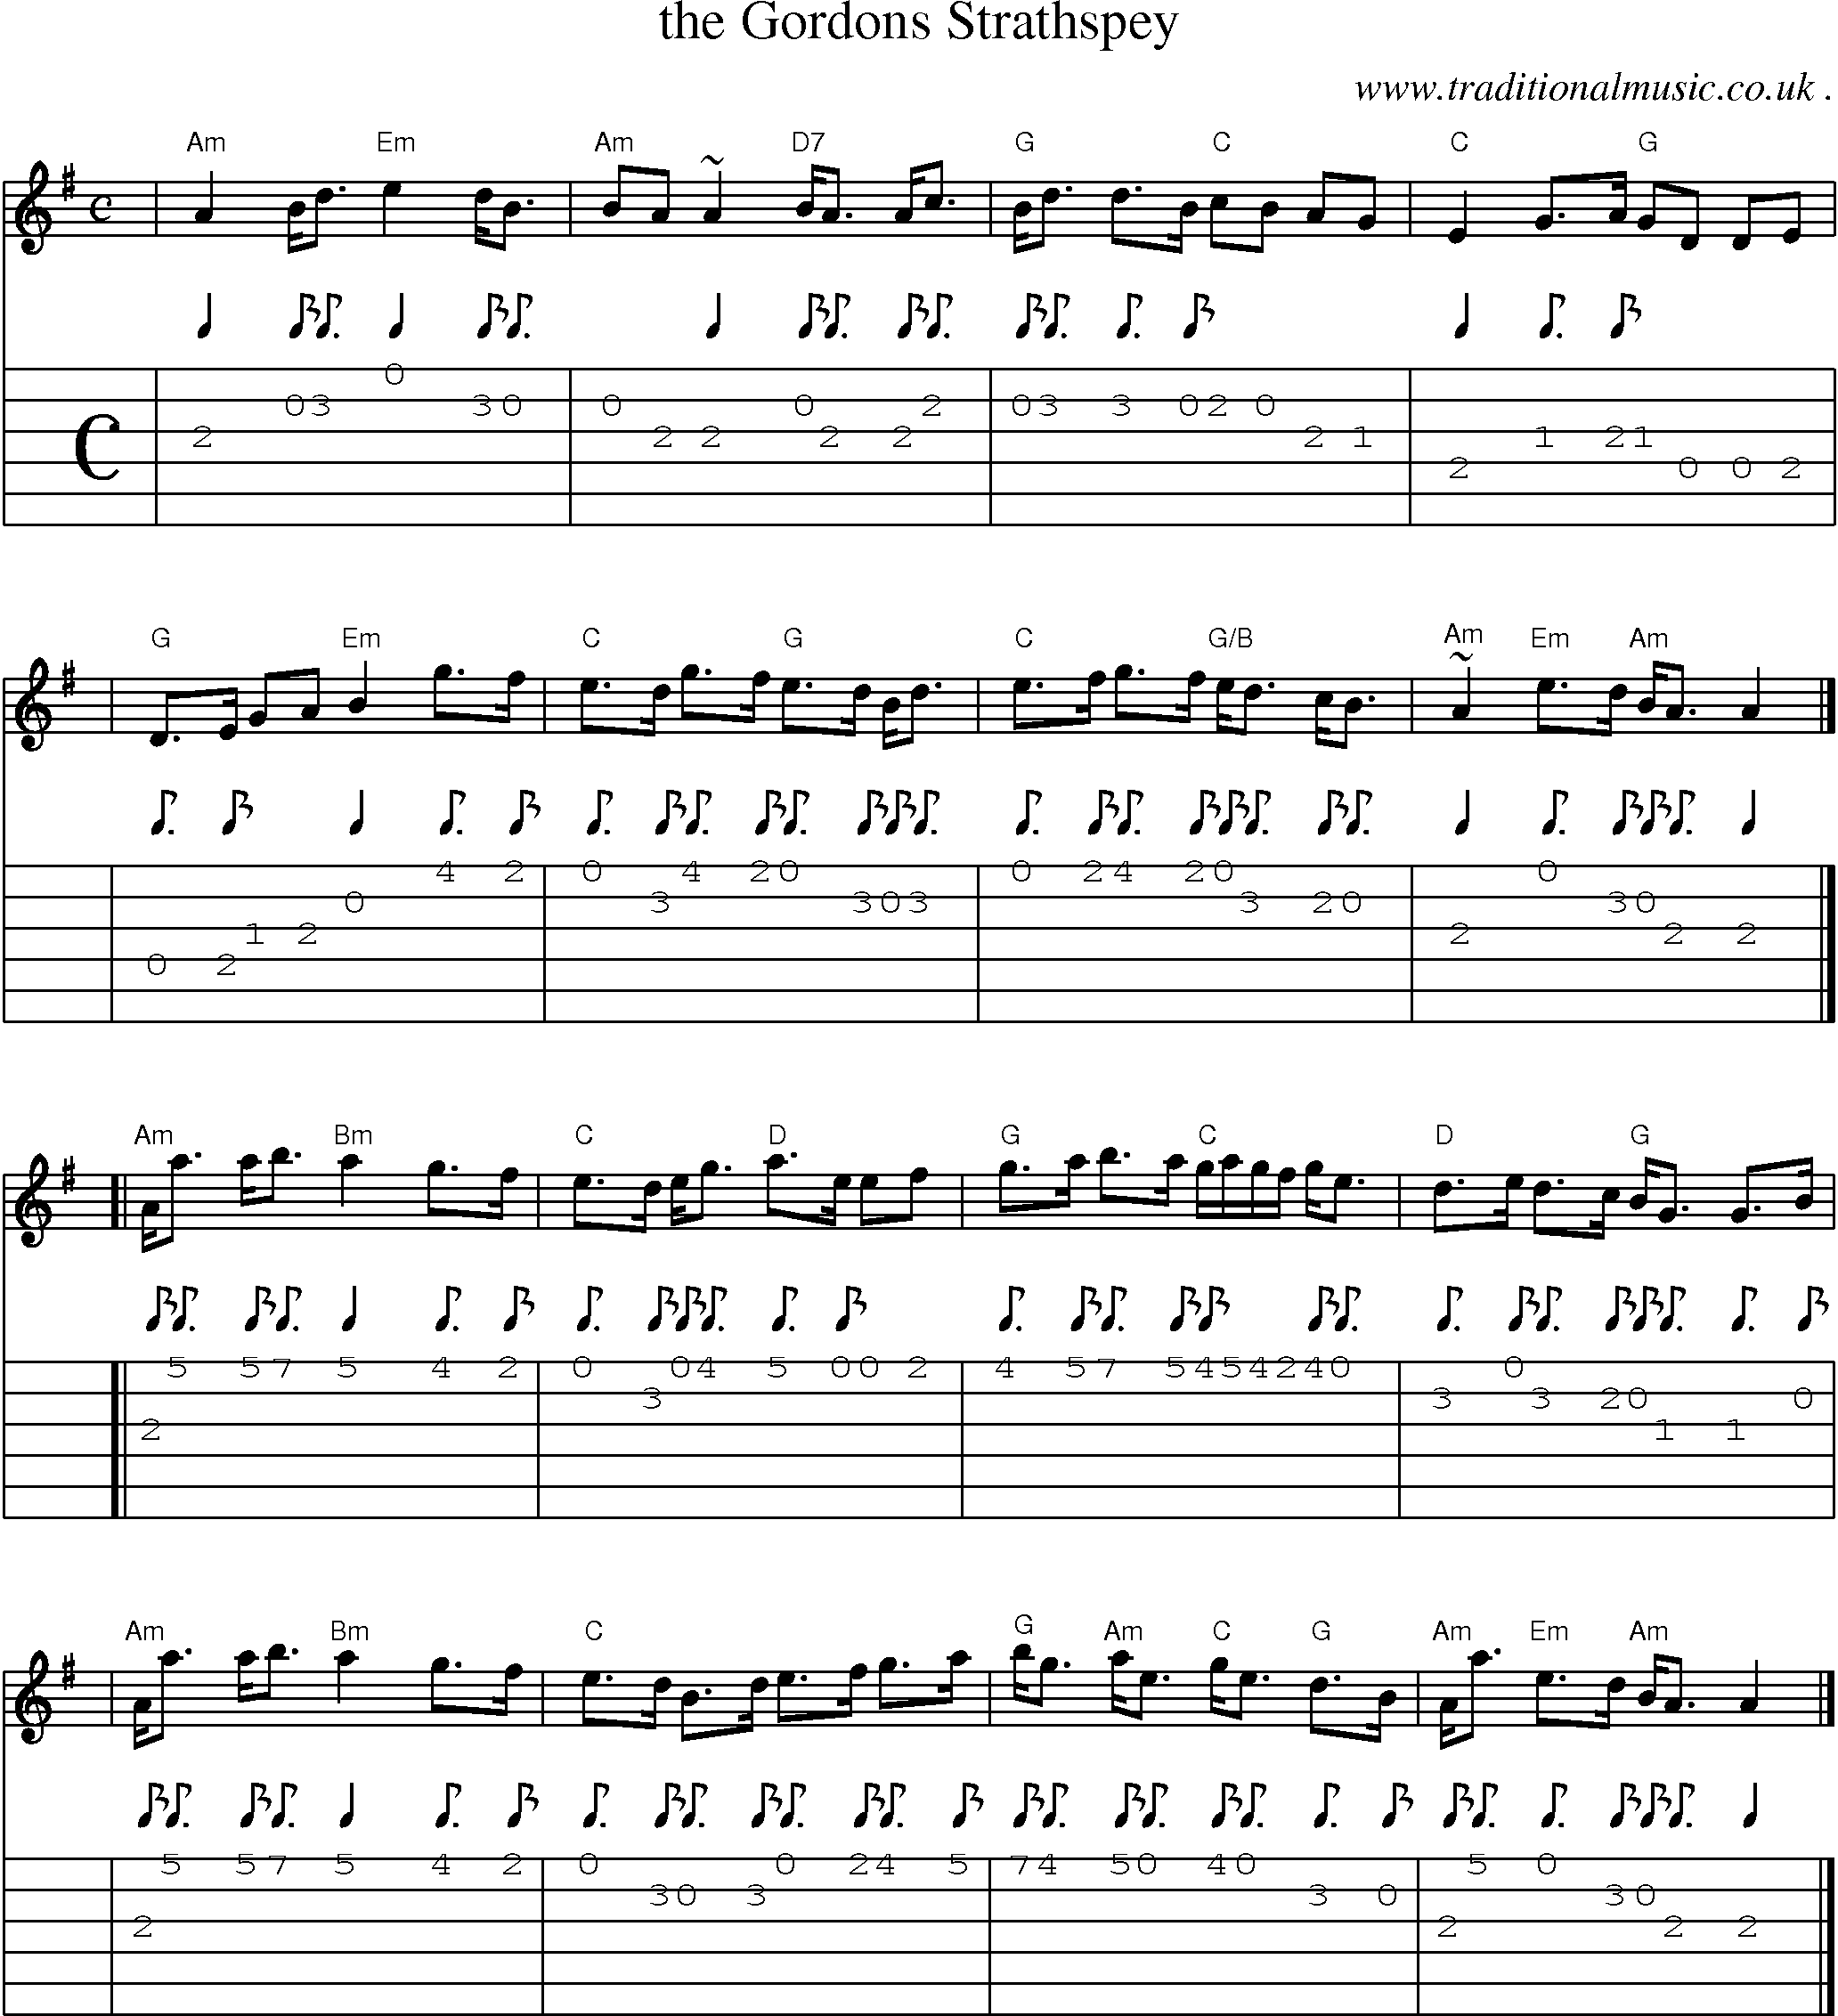 Sheet-music  score, Chords and Guitar Tabs for The Gordons Strathspey